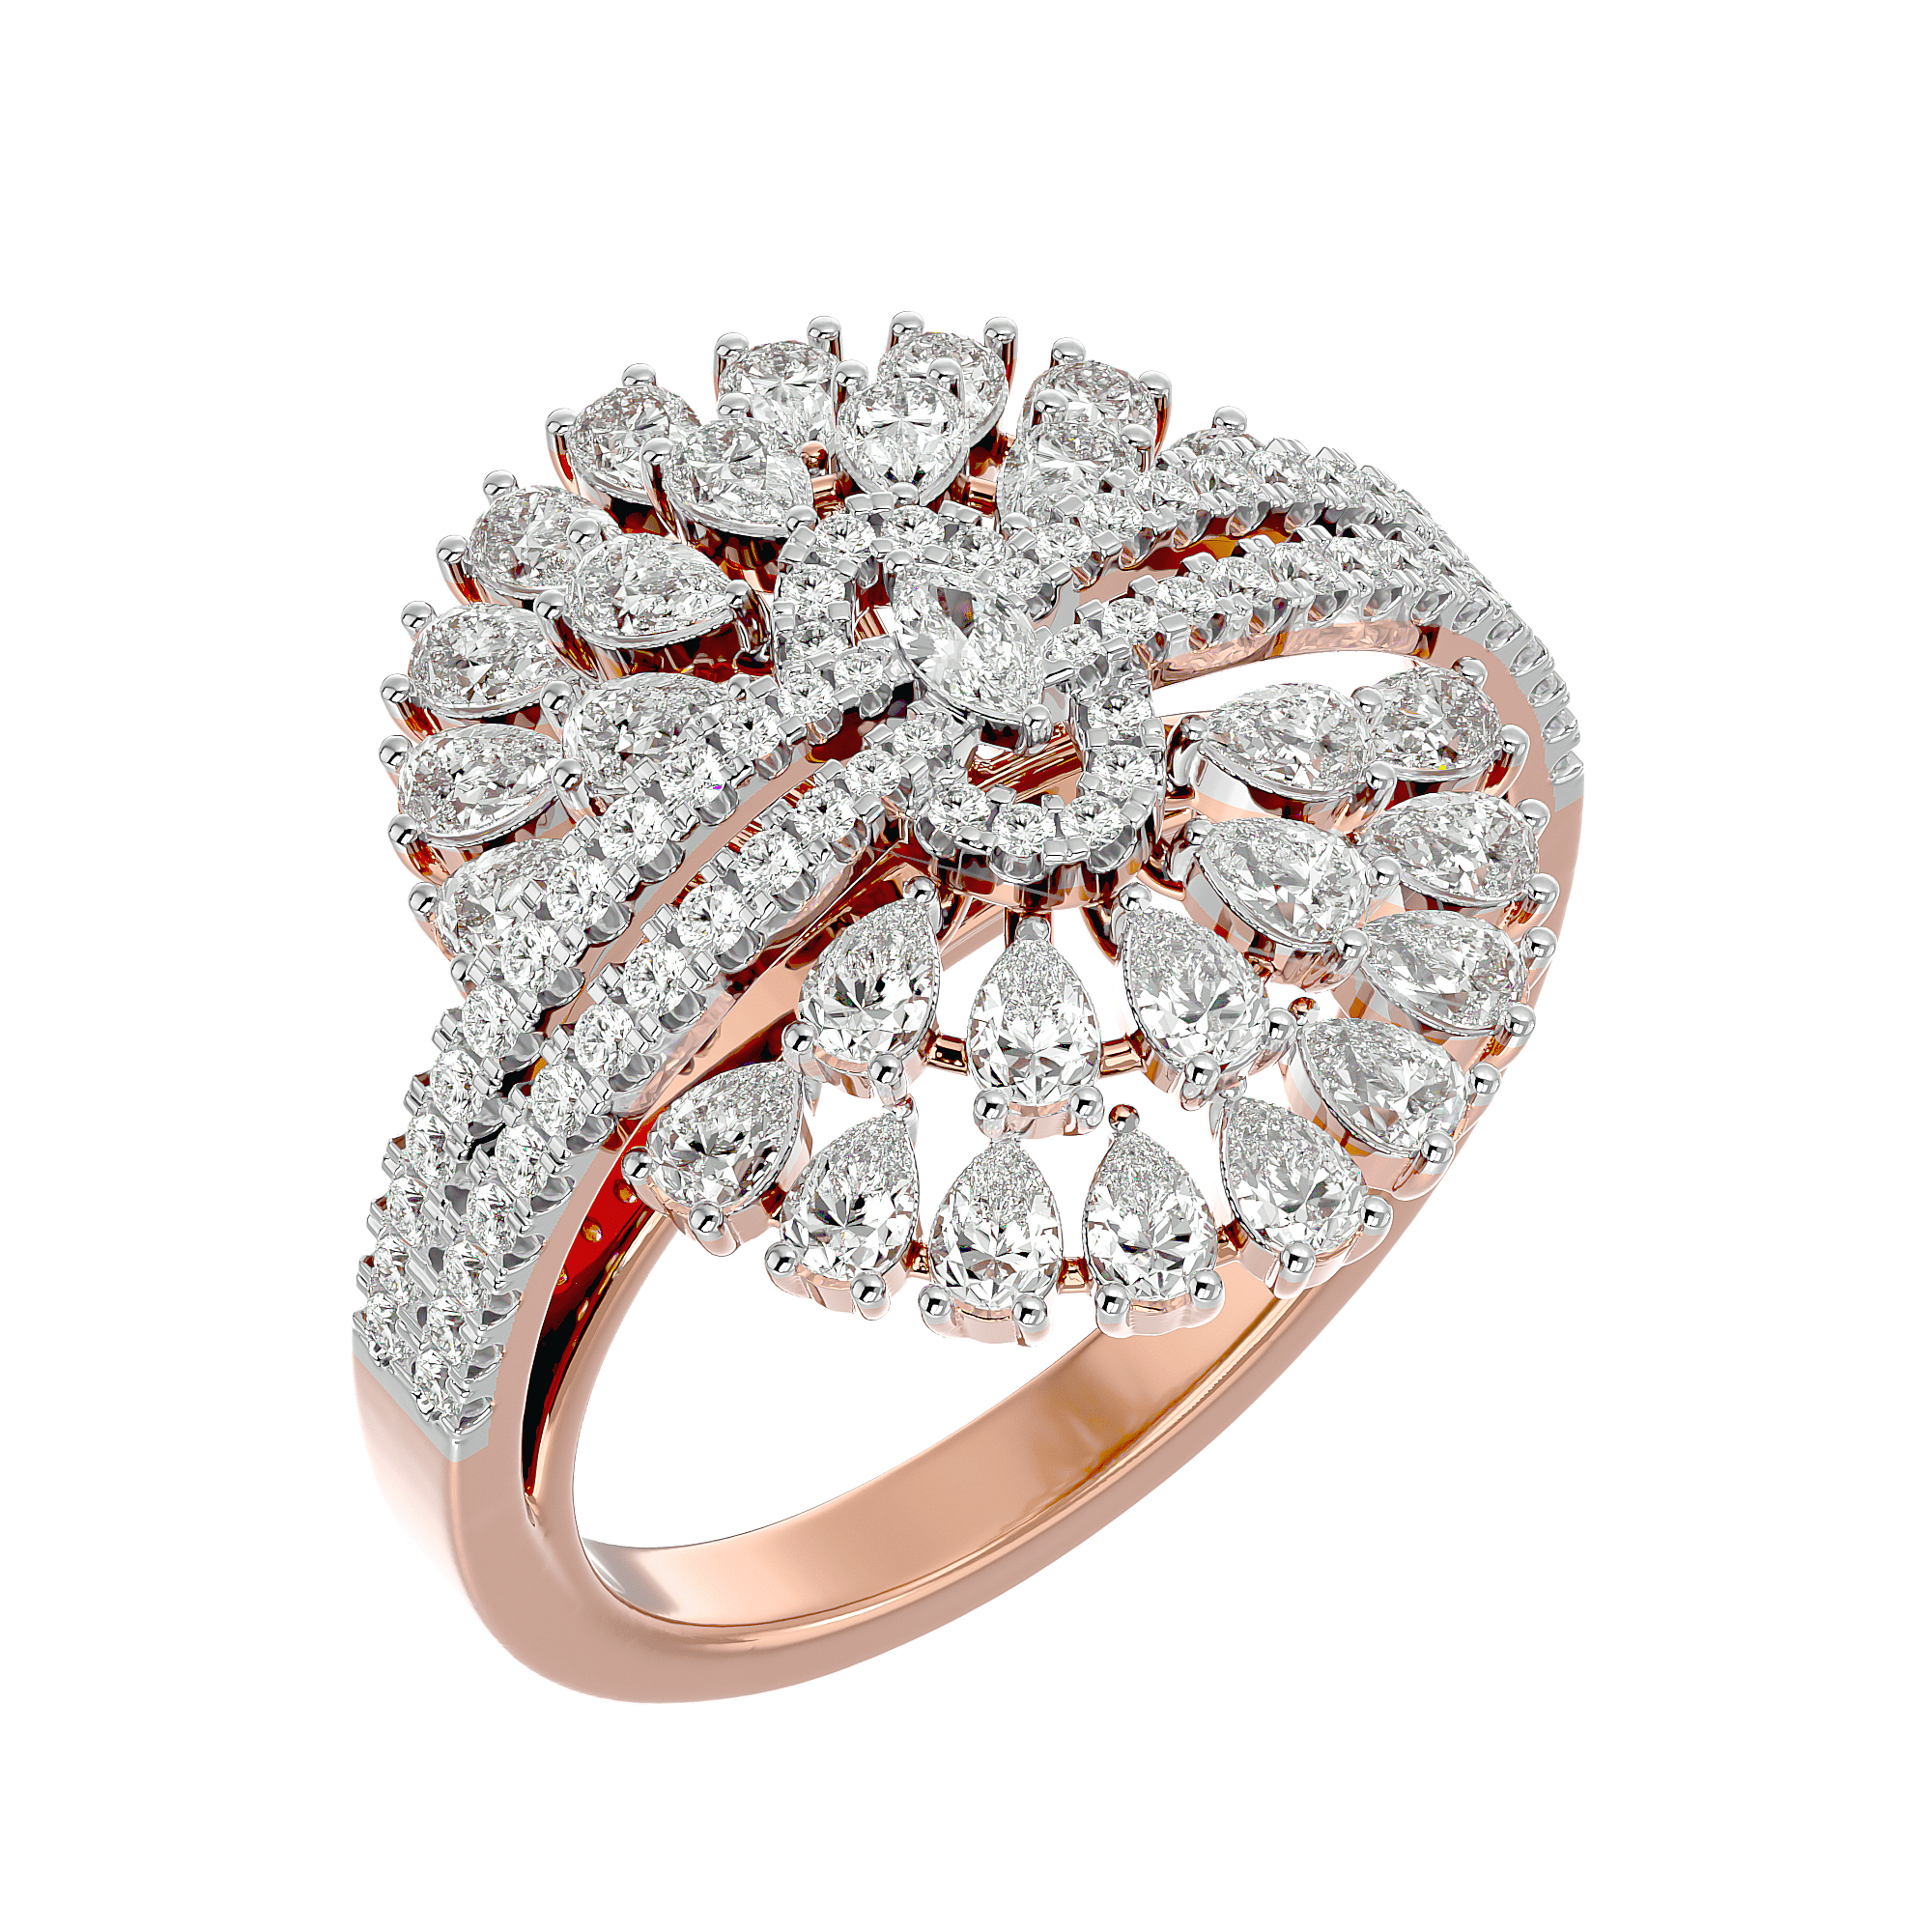 Simulated Diamond Engagement Ring Rose Gold Halo Oval Cut